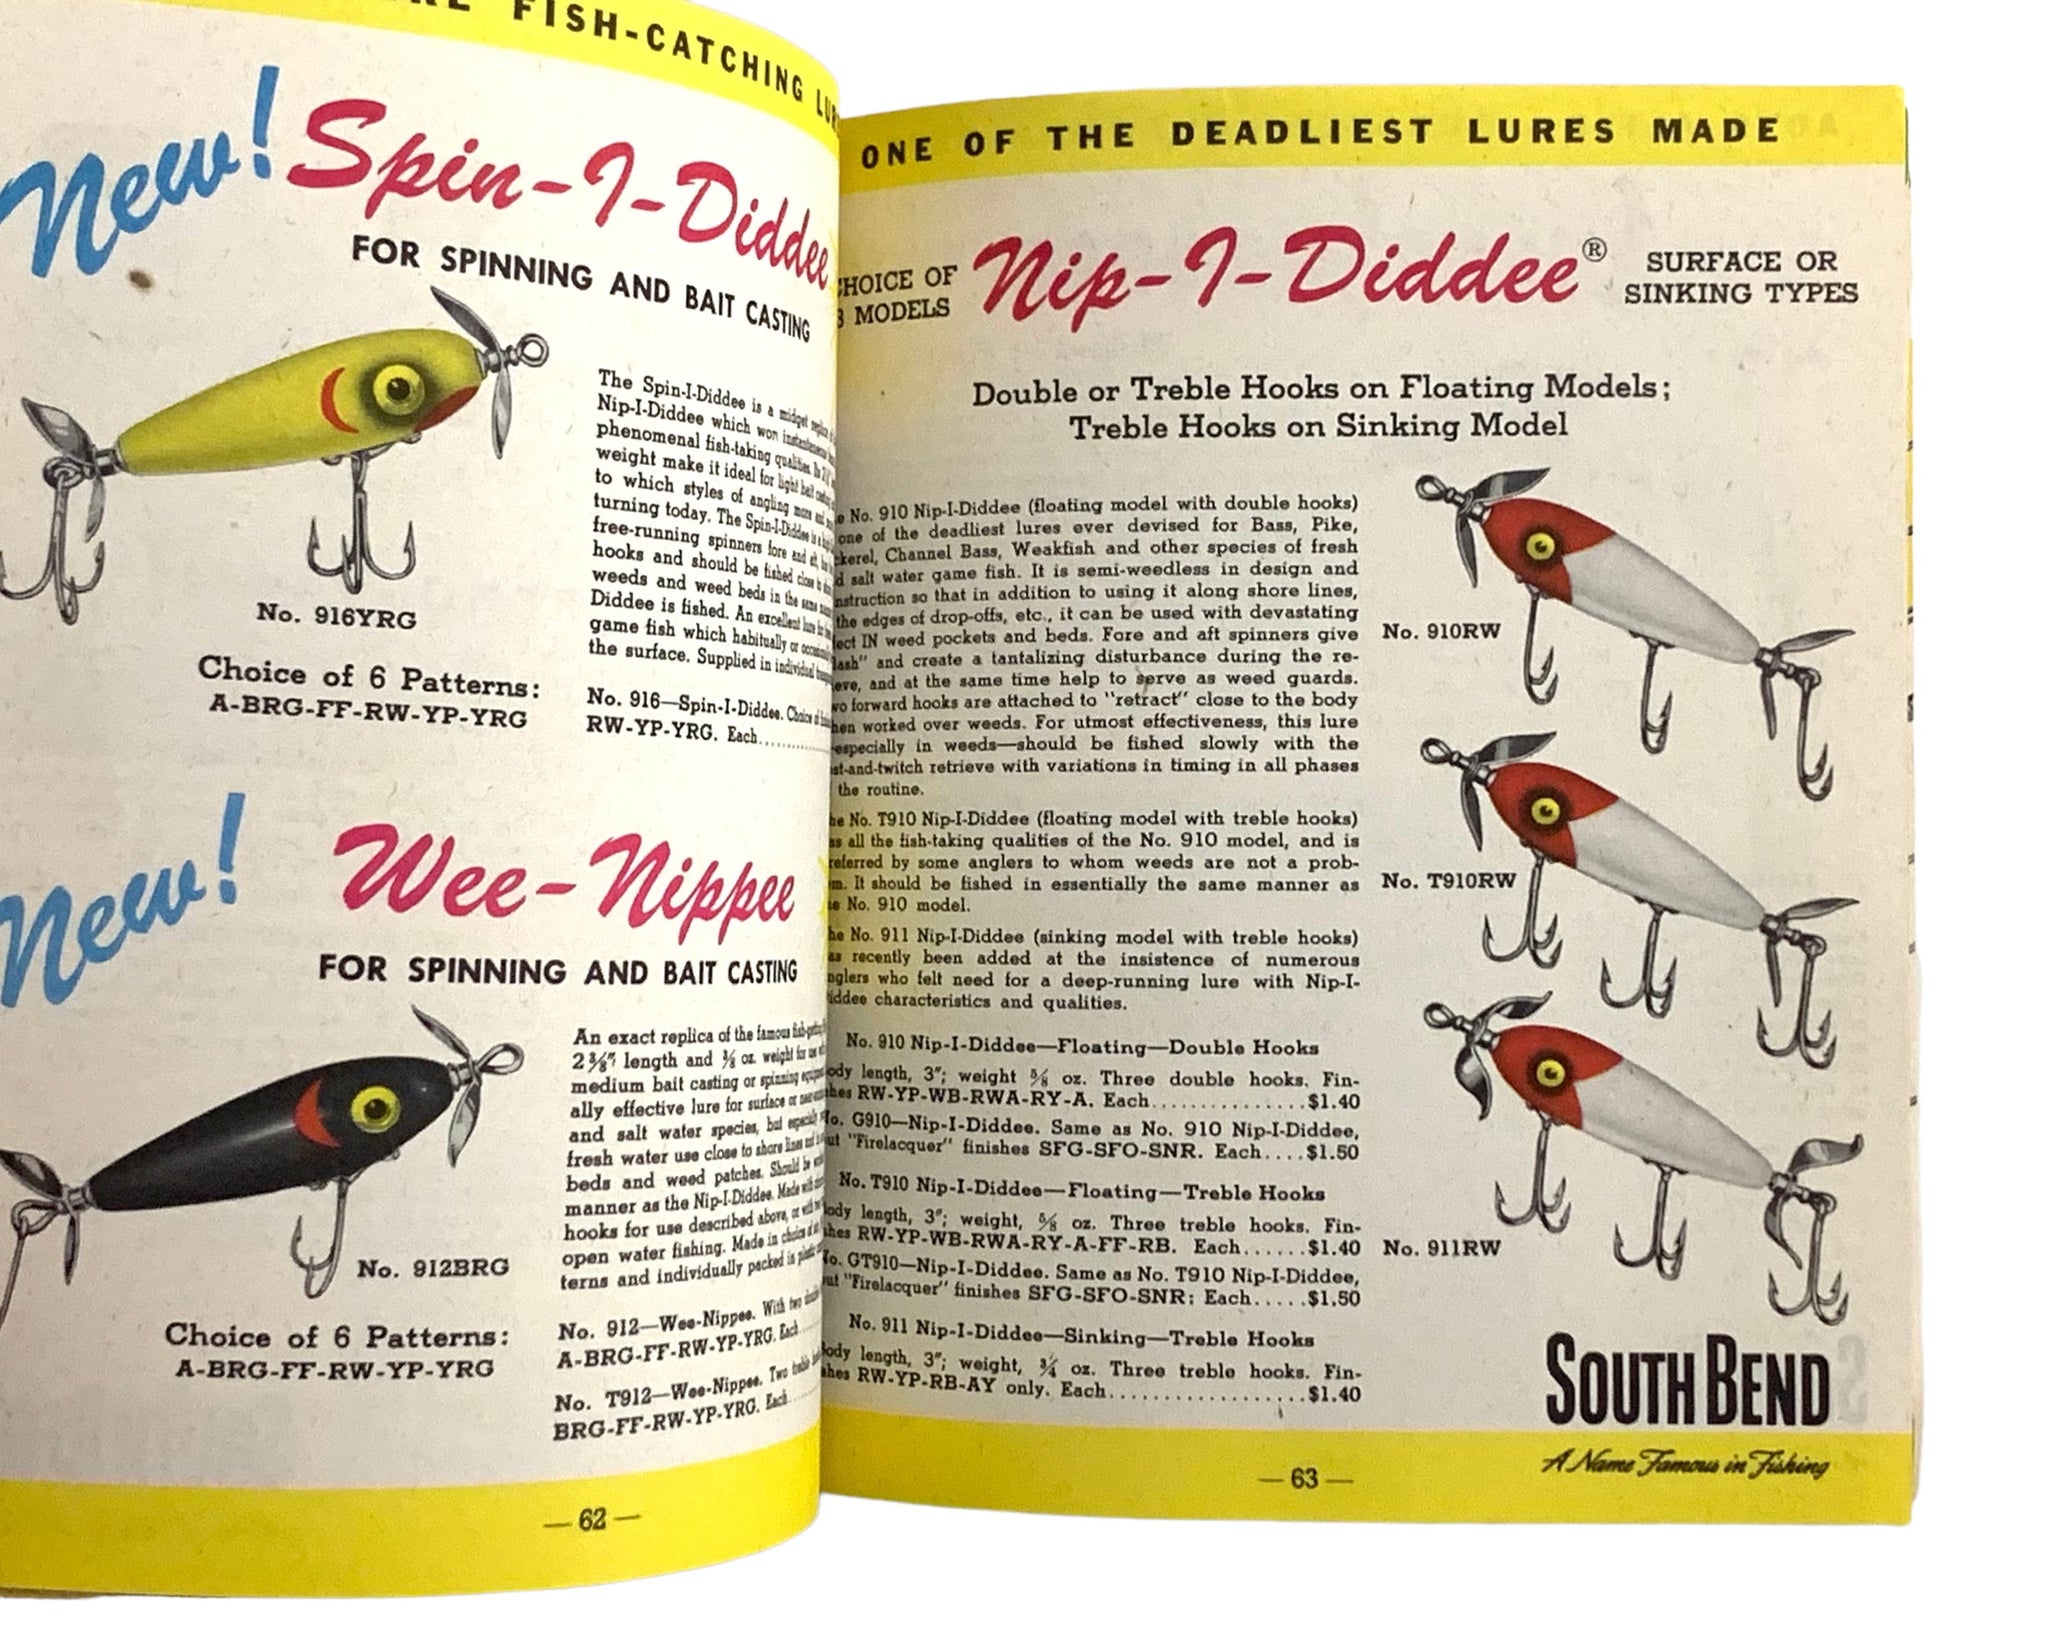 1952 SOUTH BEND BAIT COMPANY Vintage CATALOG – Toad Tackle